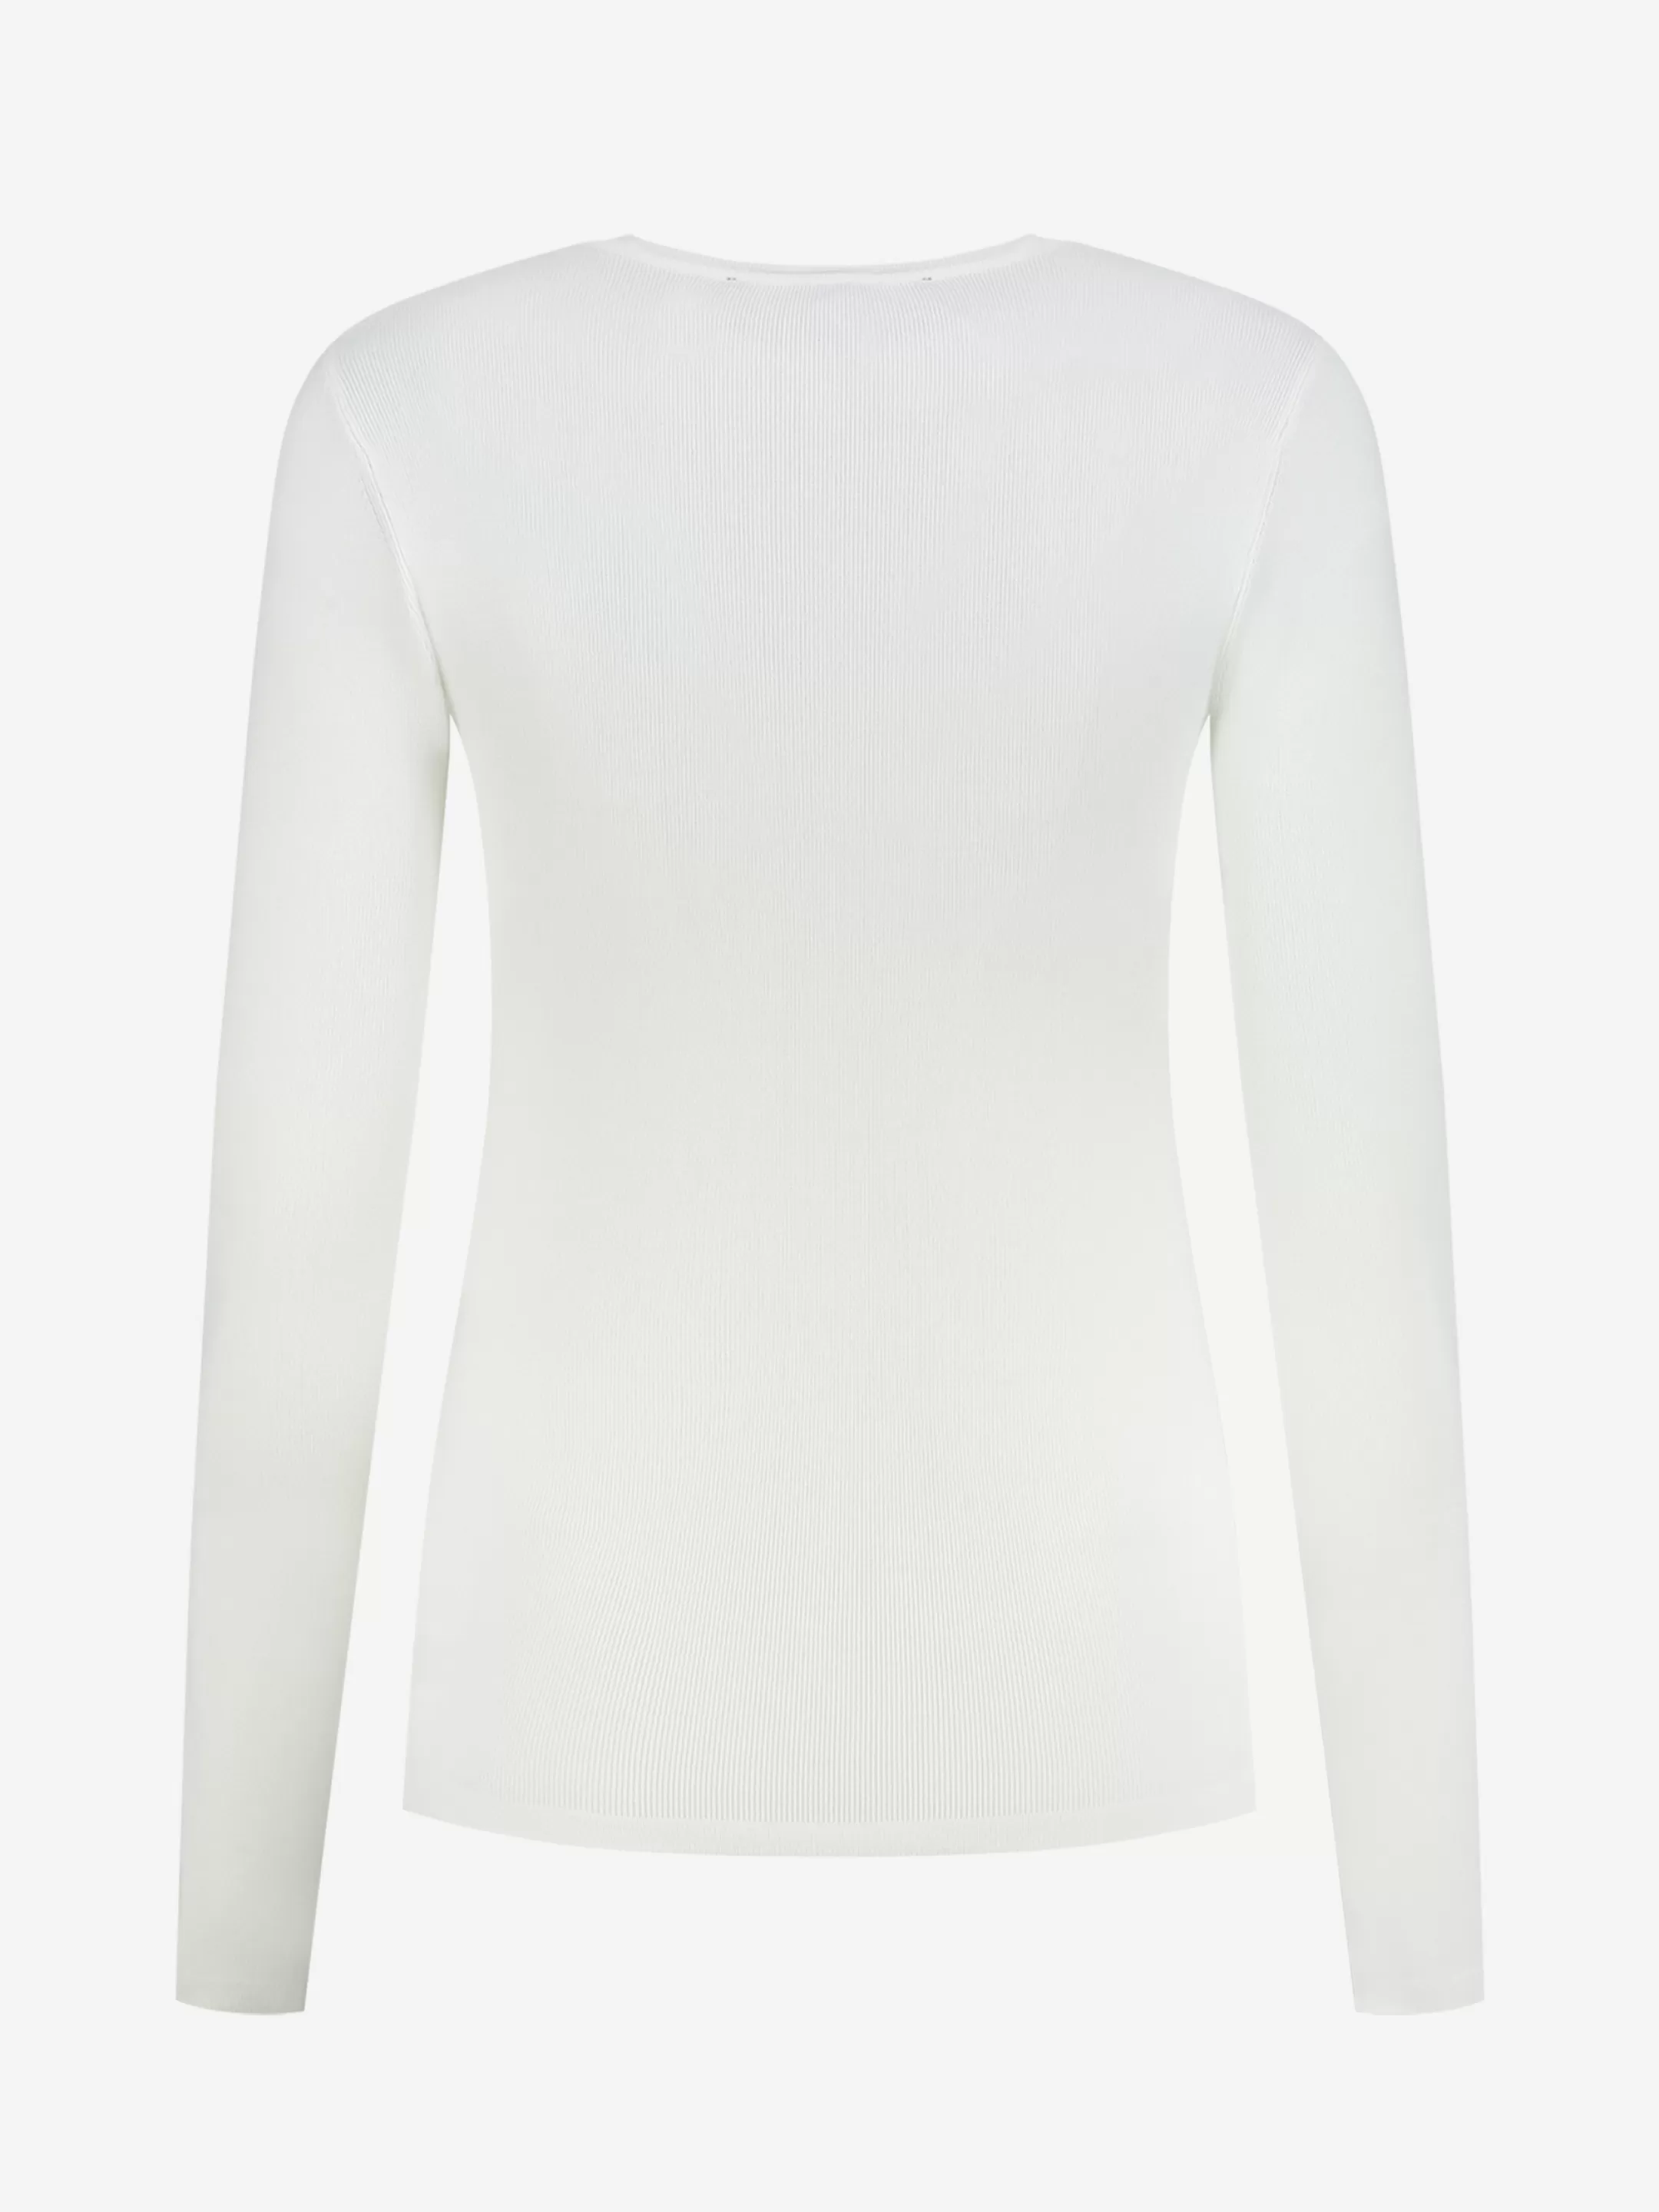 Cheap FITTED TOP MET LANGE MOUWEN    Basics | Tops